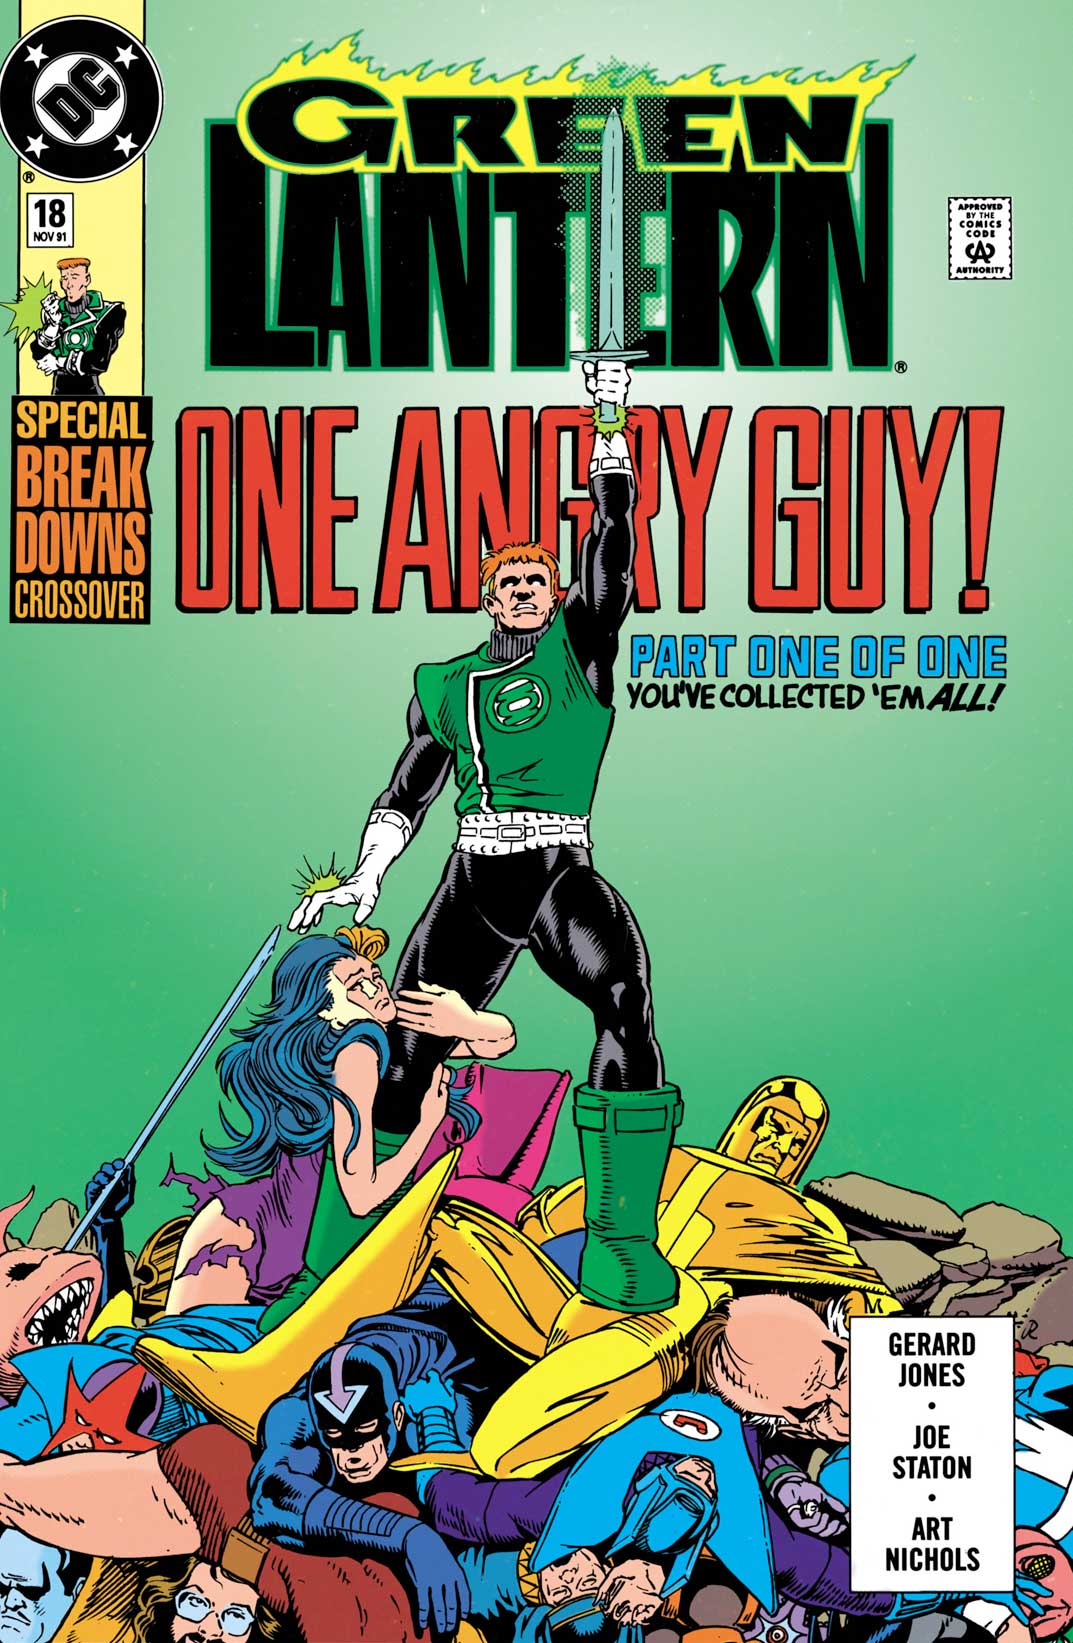 Green Lantern #18 cover by Kevin Maguire & Joe Rubinstein